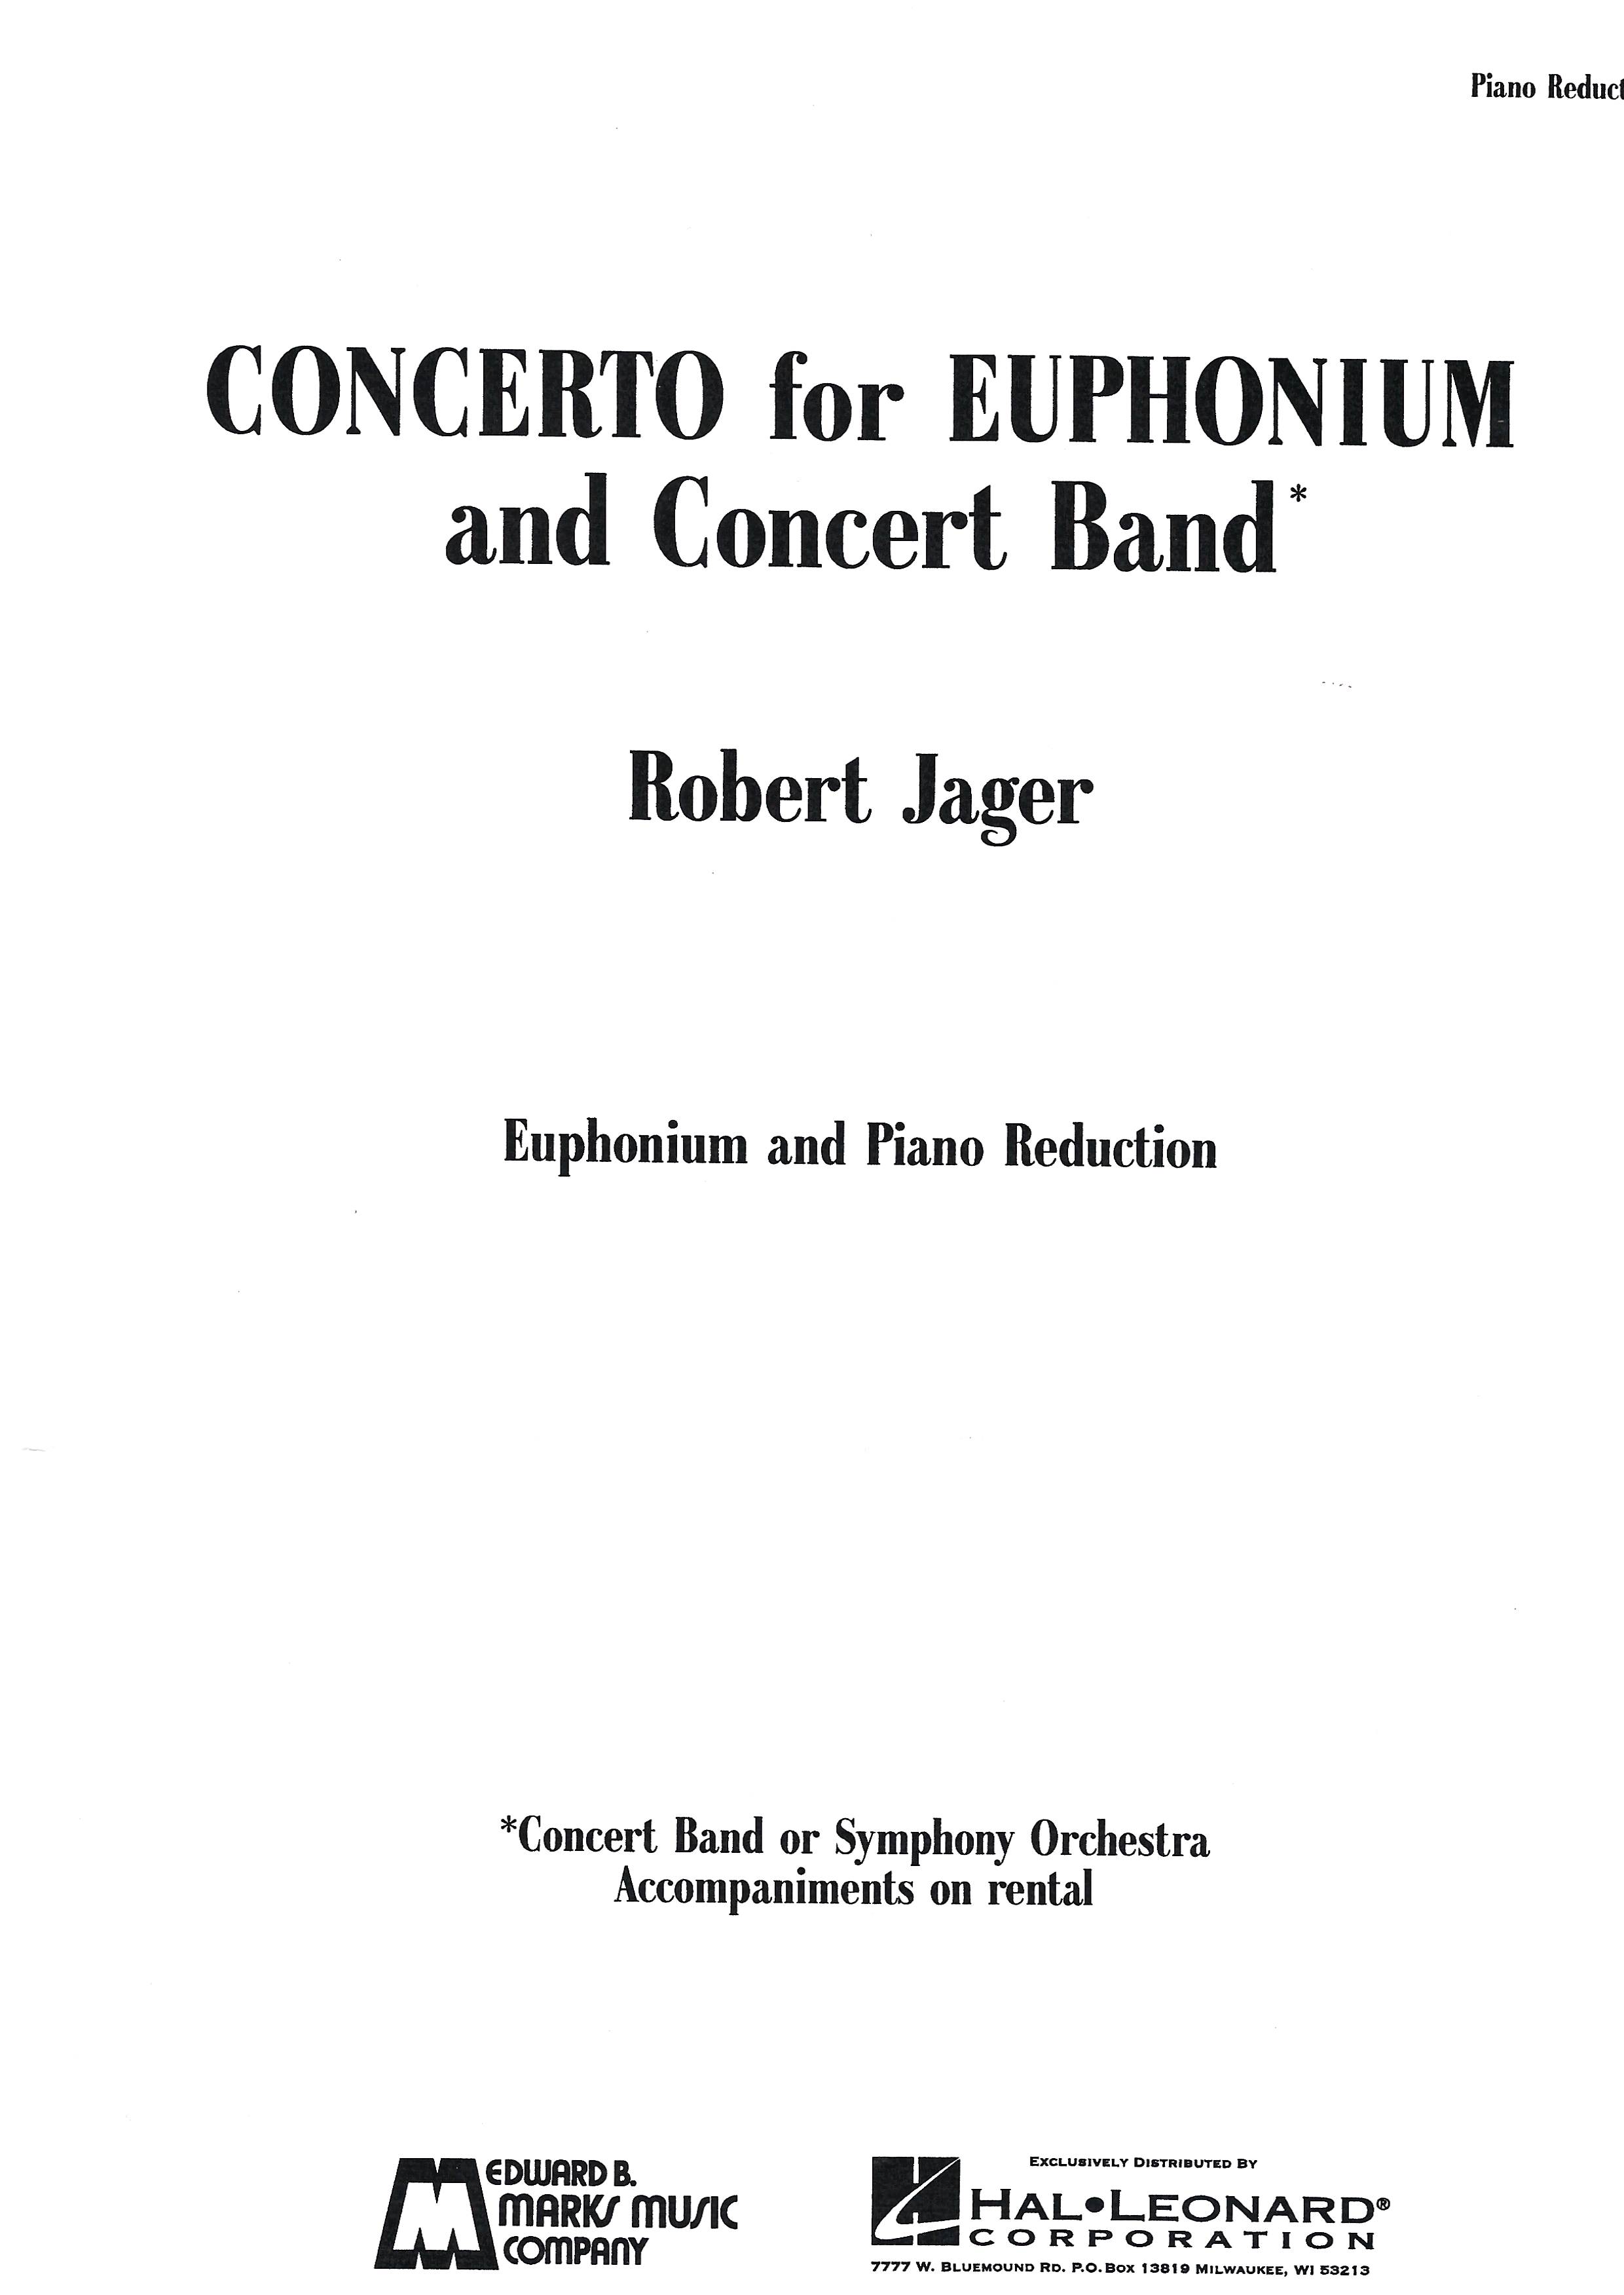 Concerto for Euphonium - Robert Jager - Euphonium and Piano (BC only)